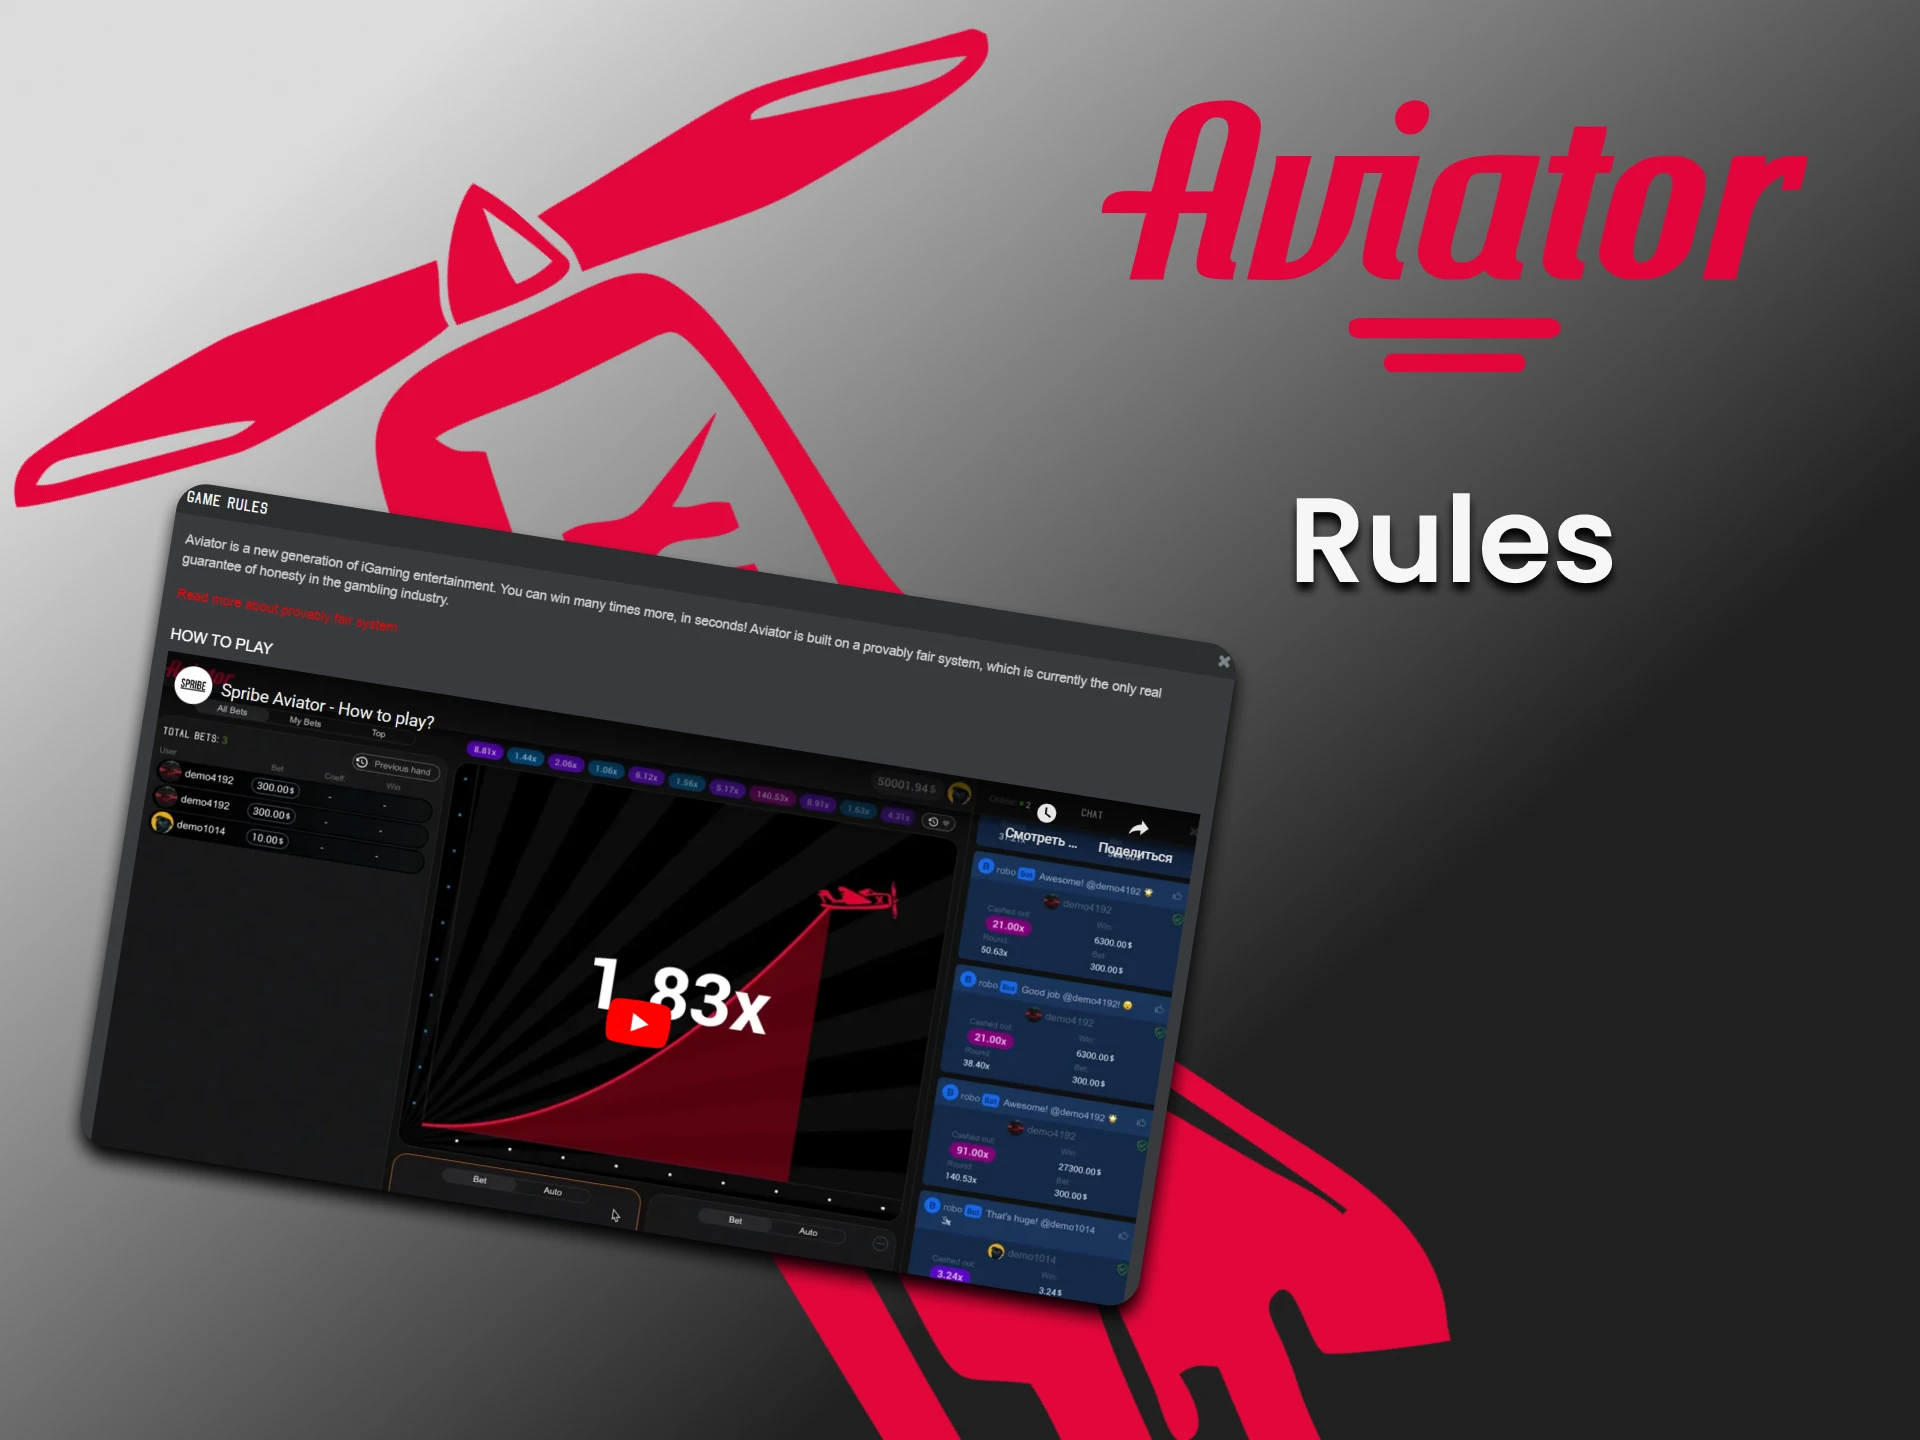 Follow the rules to win in the game Aviator.